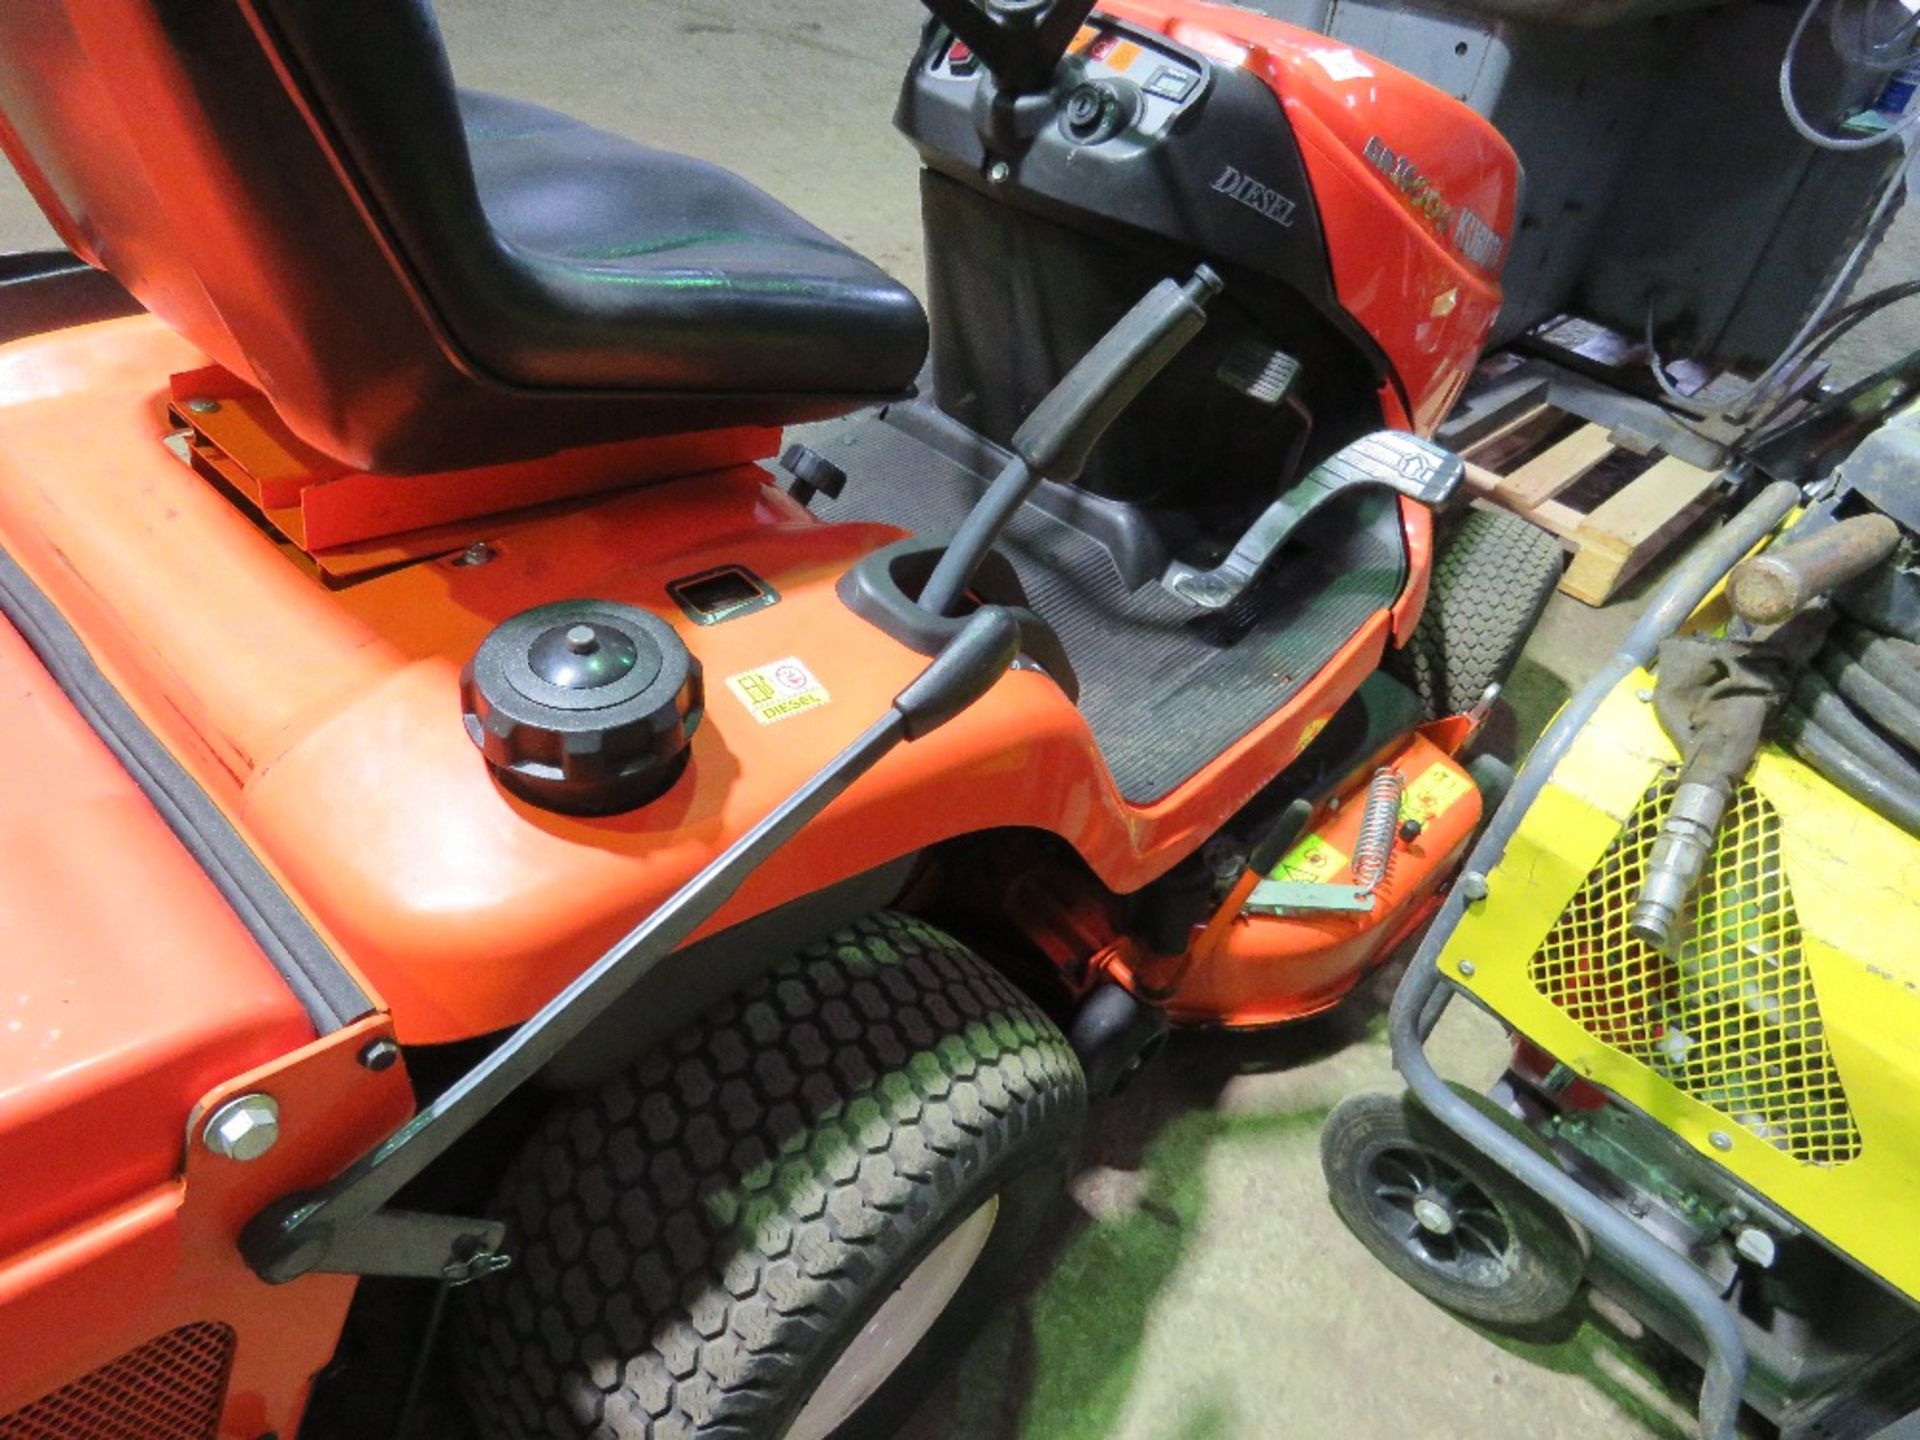 KUBOTA GR1600-II DIESEL RIDE ON MOWER WITH REAR COLLECTOR PLUS DISCHARGE CHUTE. SN:30142. WHEN TESTE - Image 8 of 14